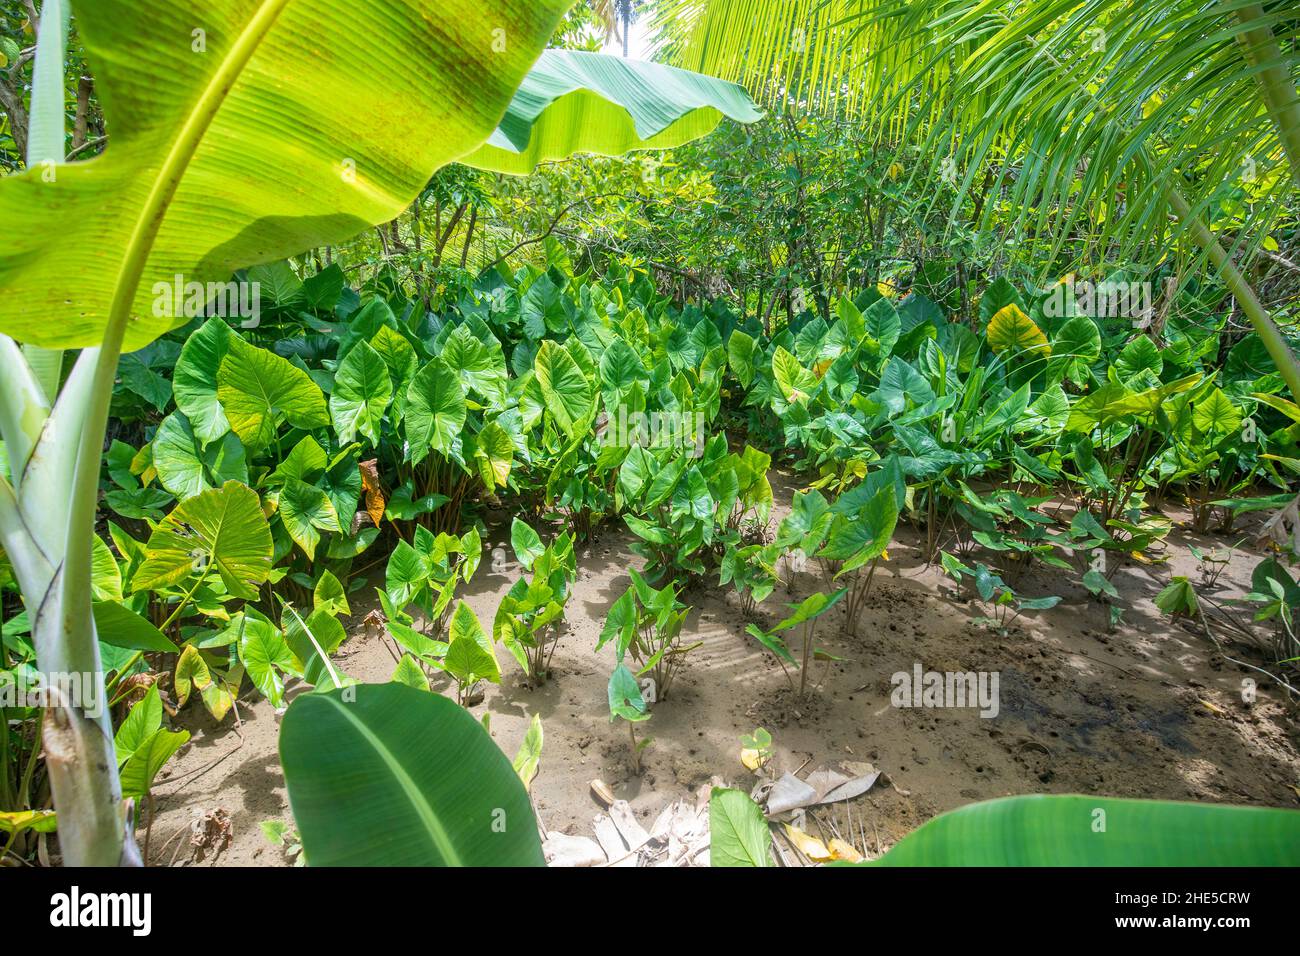 A taro field on the island of Yap, Federated States of Micronesia, Pacific Ocean. Stock Photo